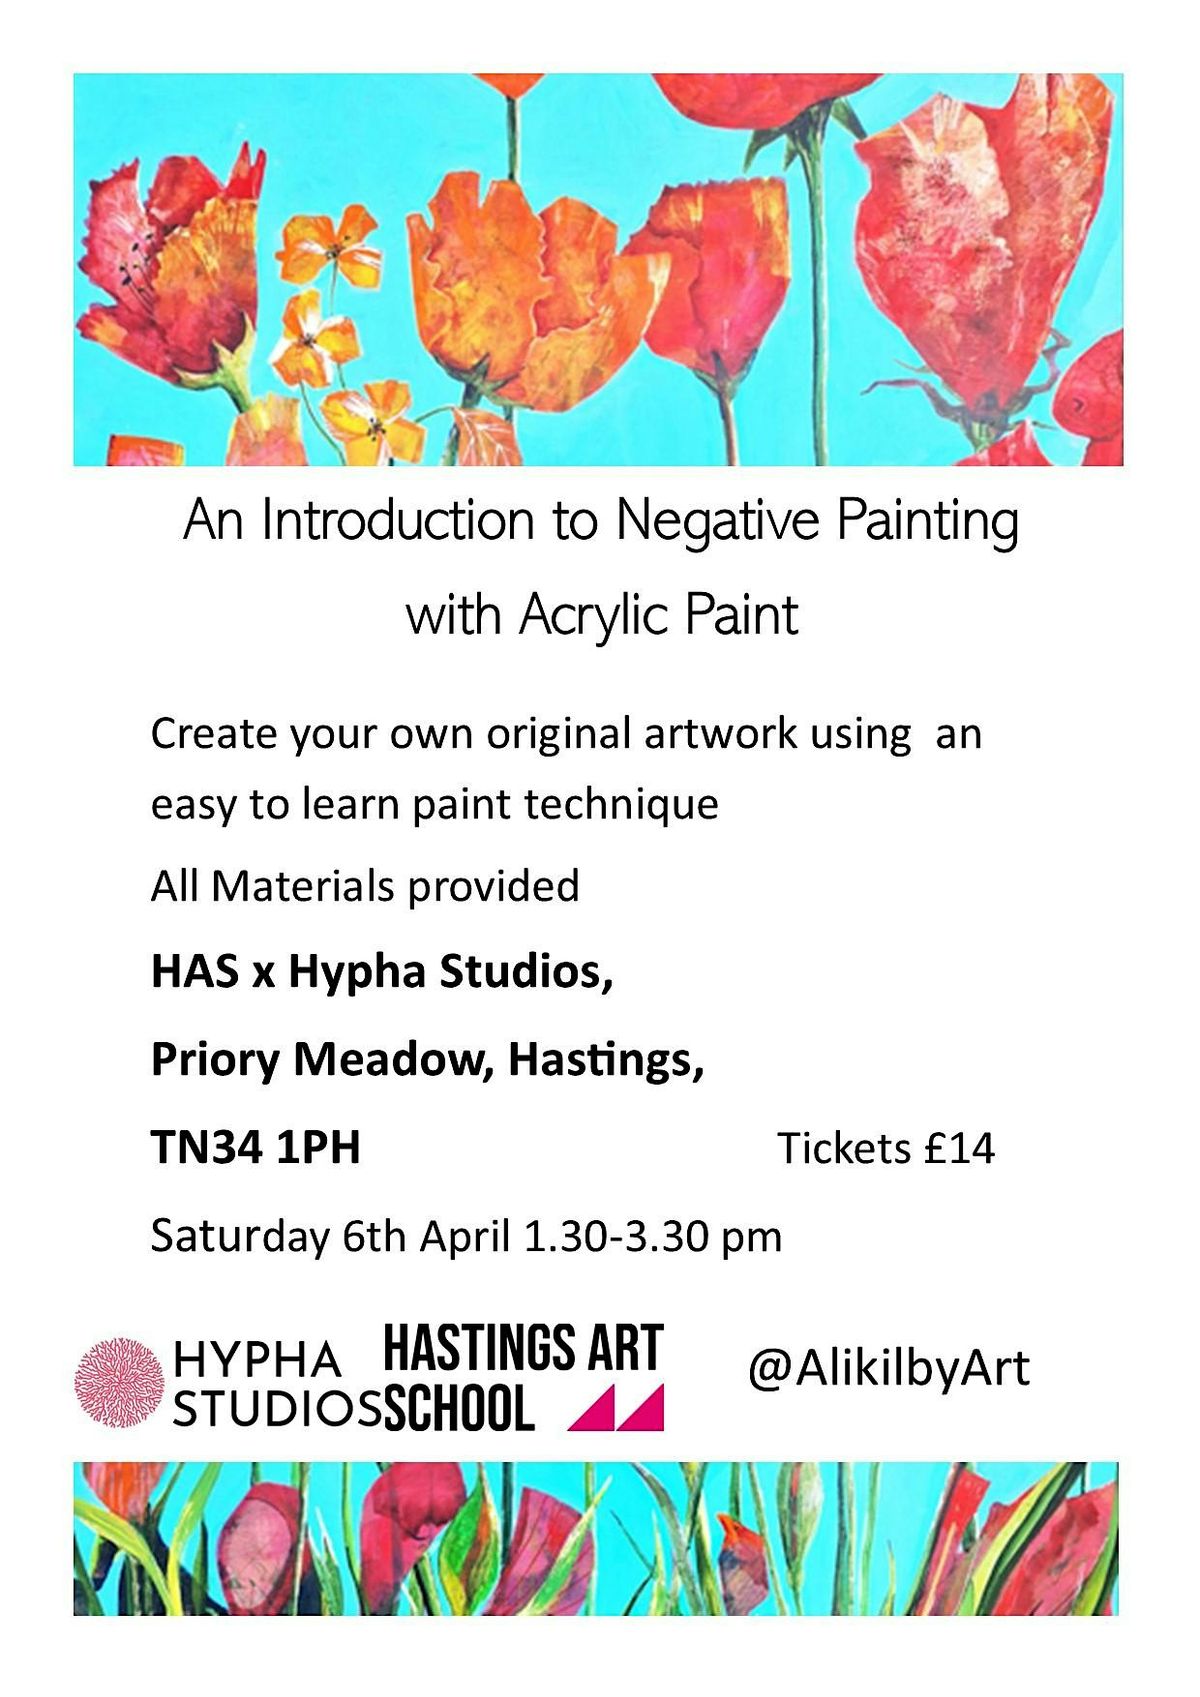 An Introduction to Negative Painting with Acrylic paint with Ali Kilby